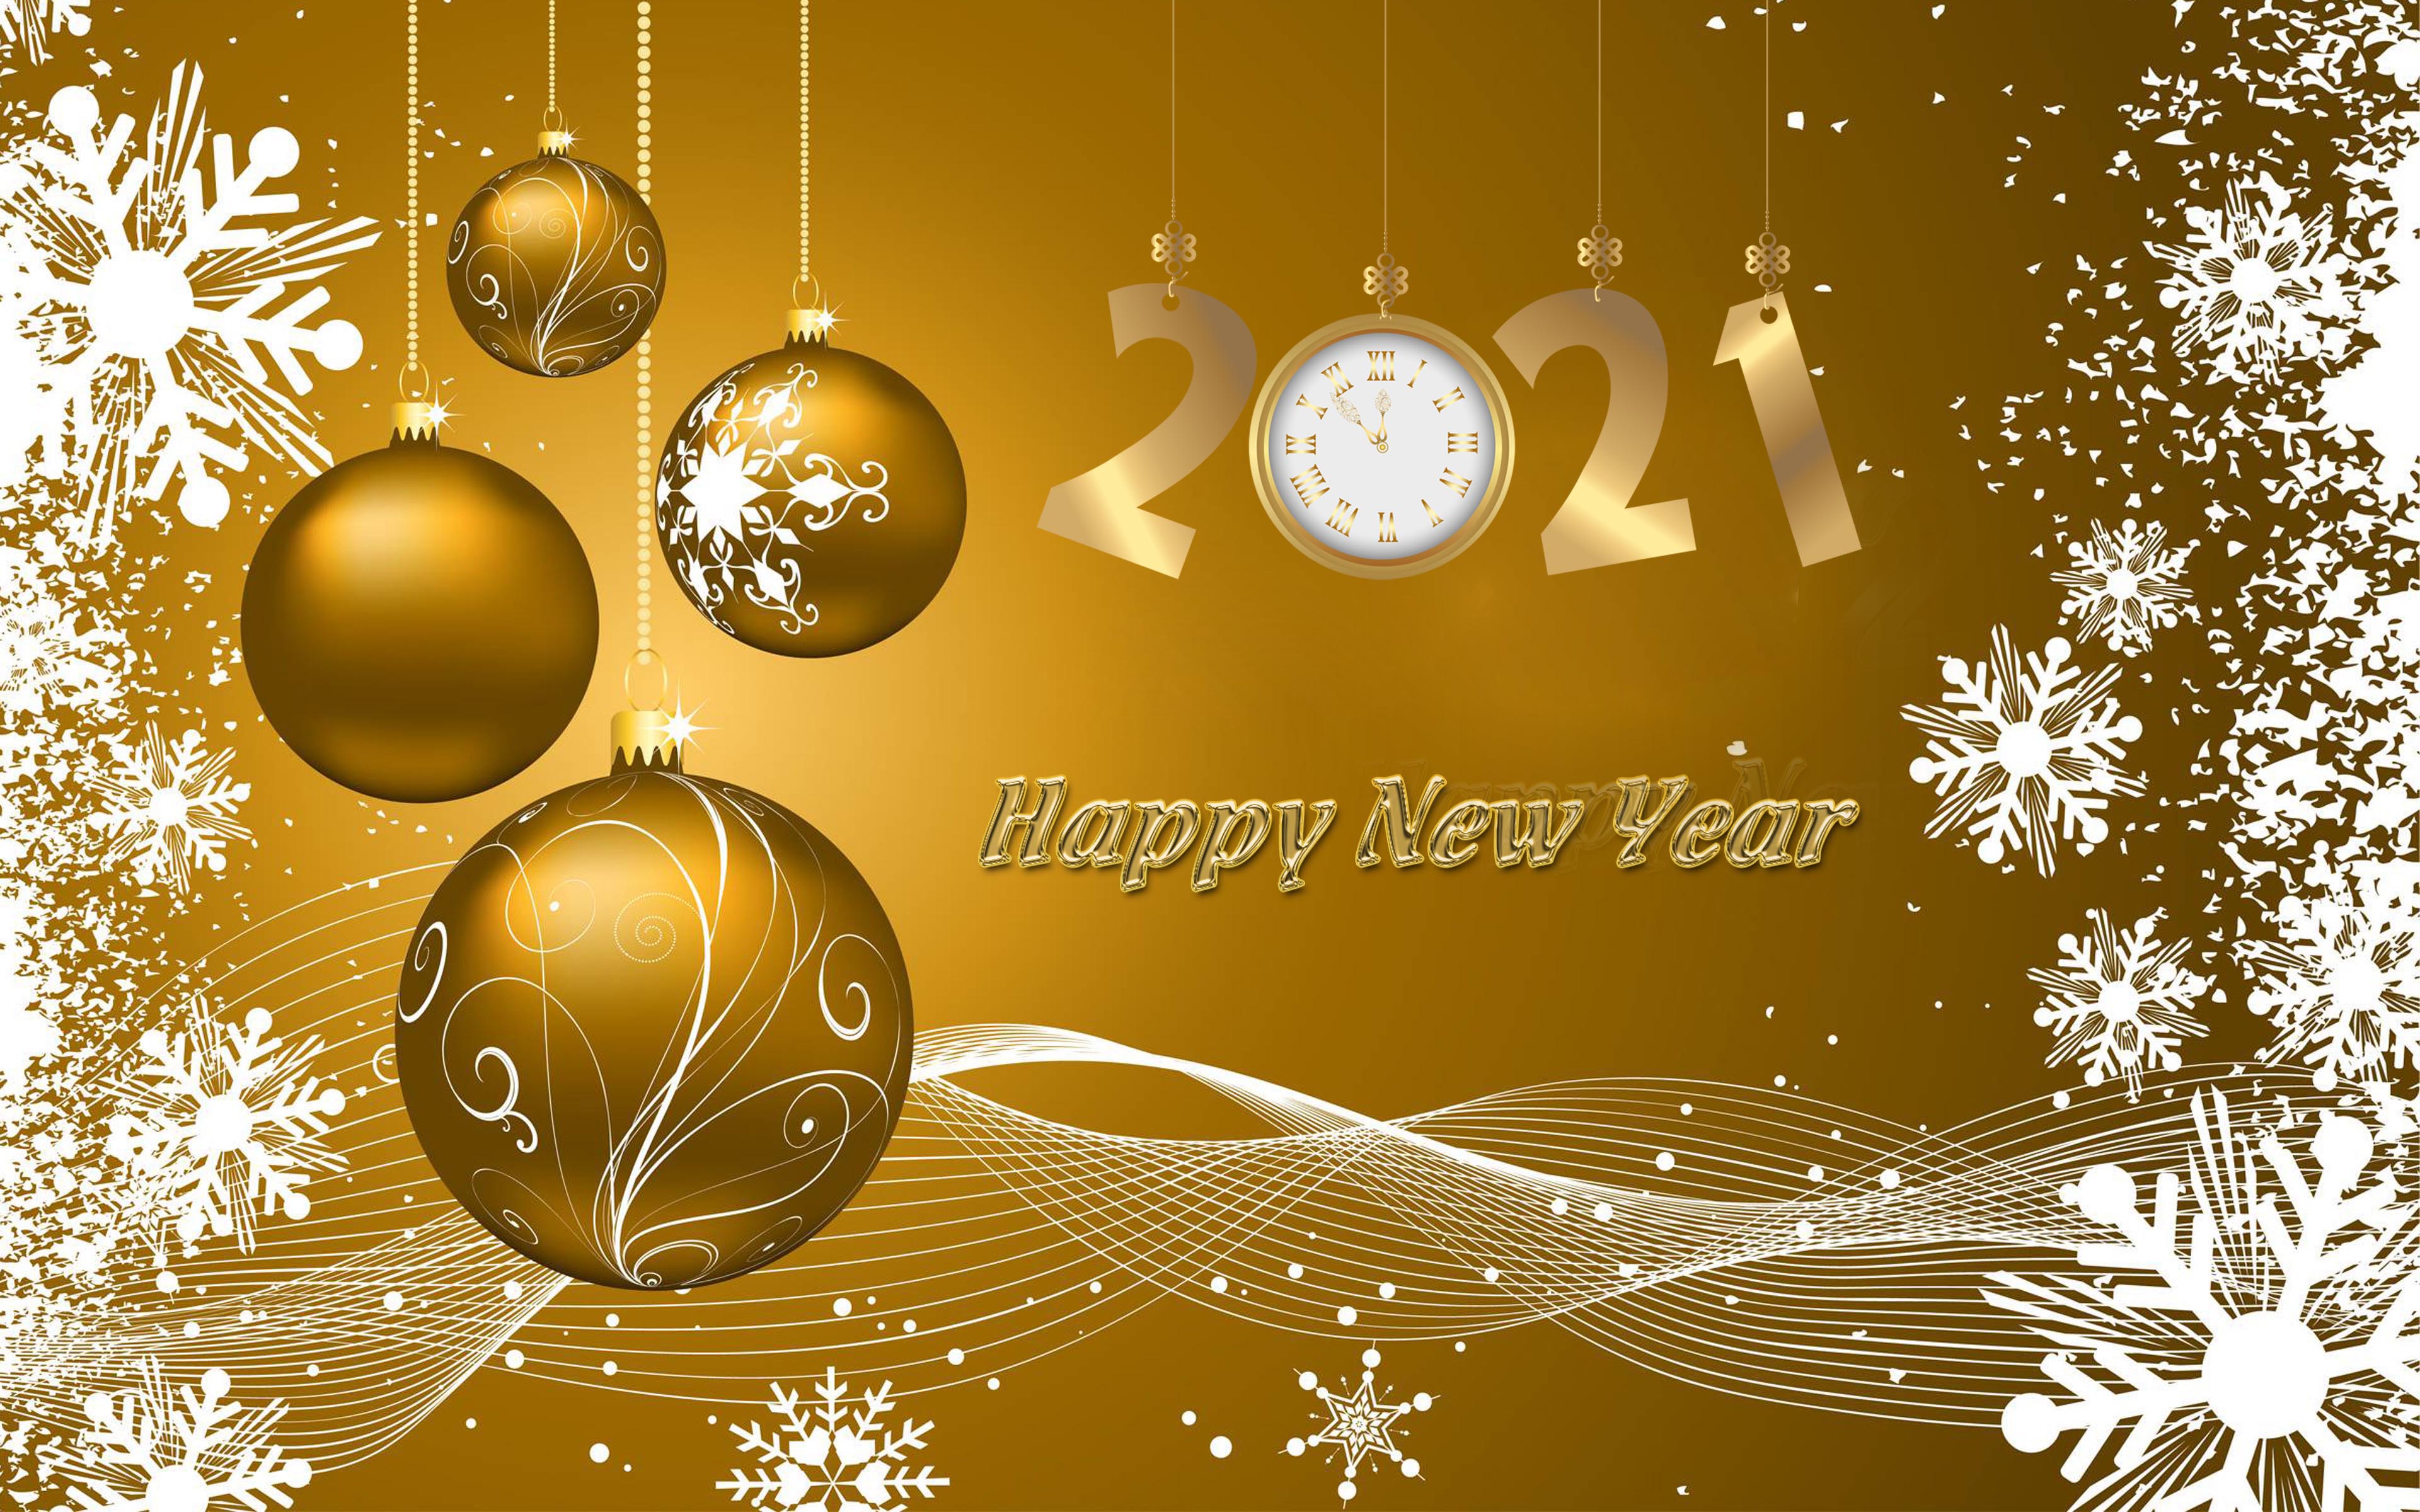 Happy New 2021 Year Wishes Gold Greeting Card & Quotes 4k Ultrahd Wallpaper 3840×2400, Wallpaper13.com